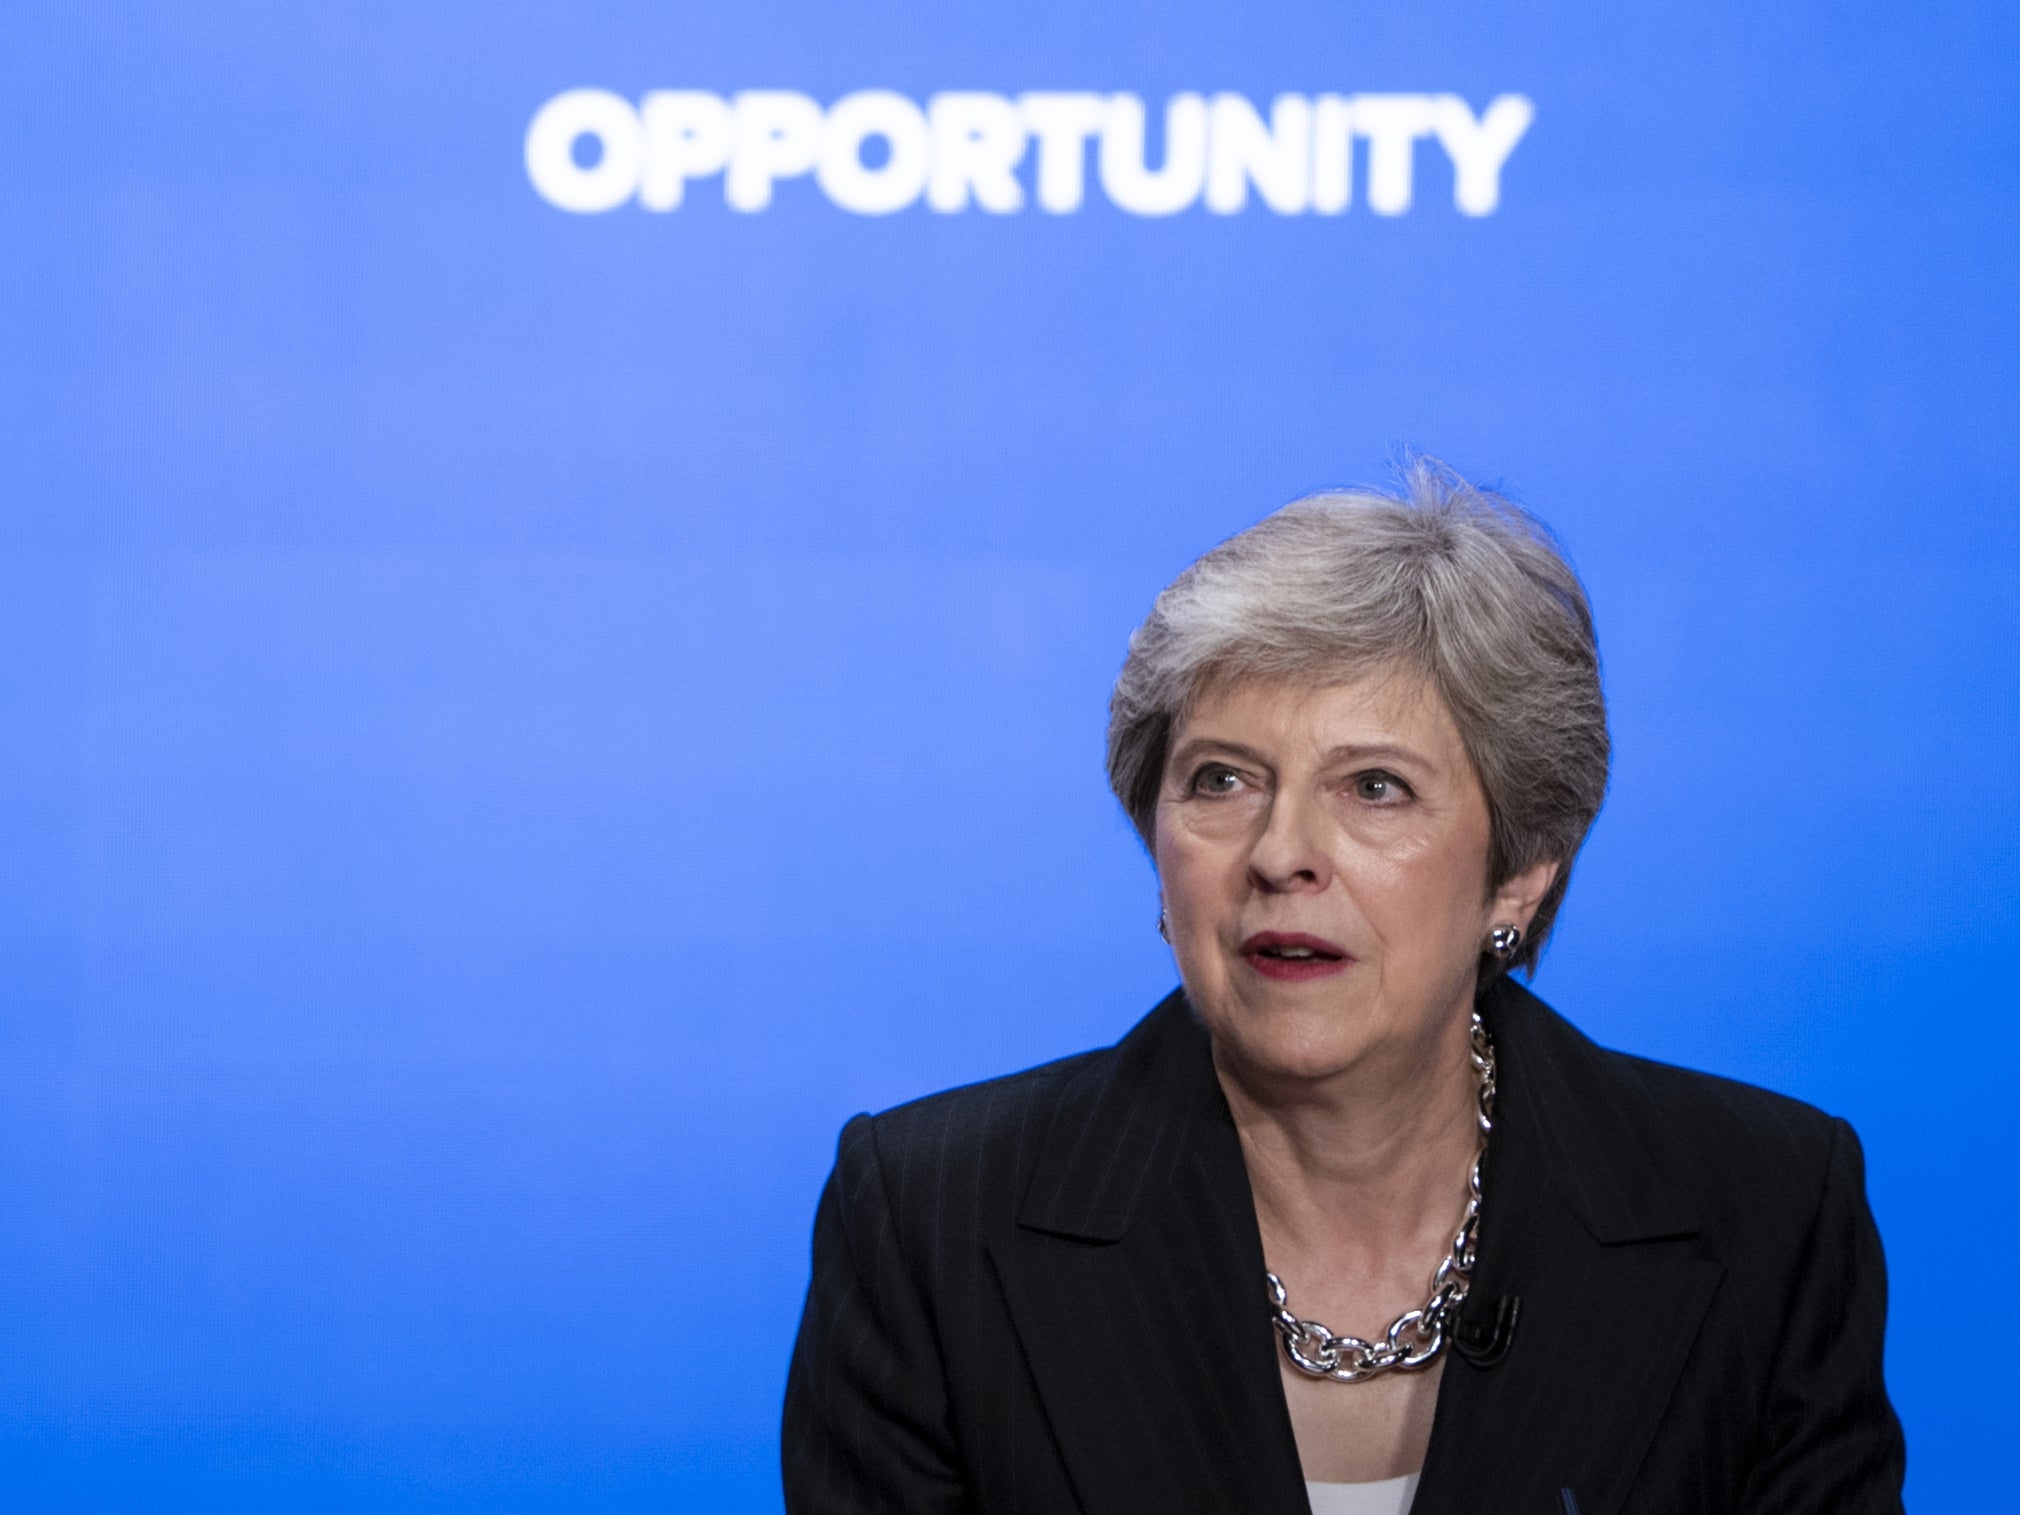 The government is ramping up preparations for a no-deal Brexit, with just weeks left for Theresa May to secure an agreement